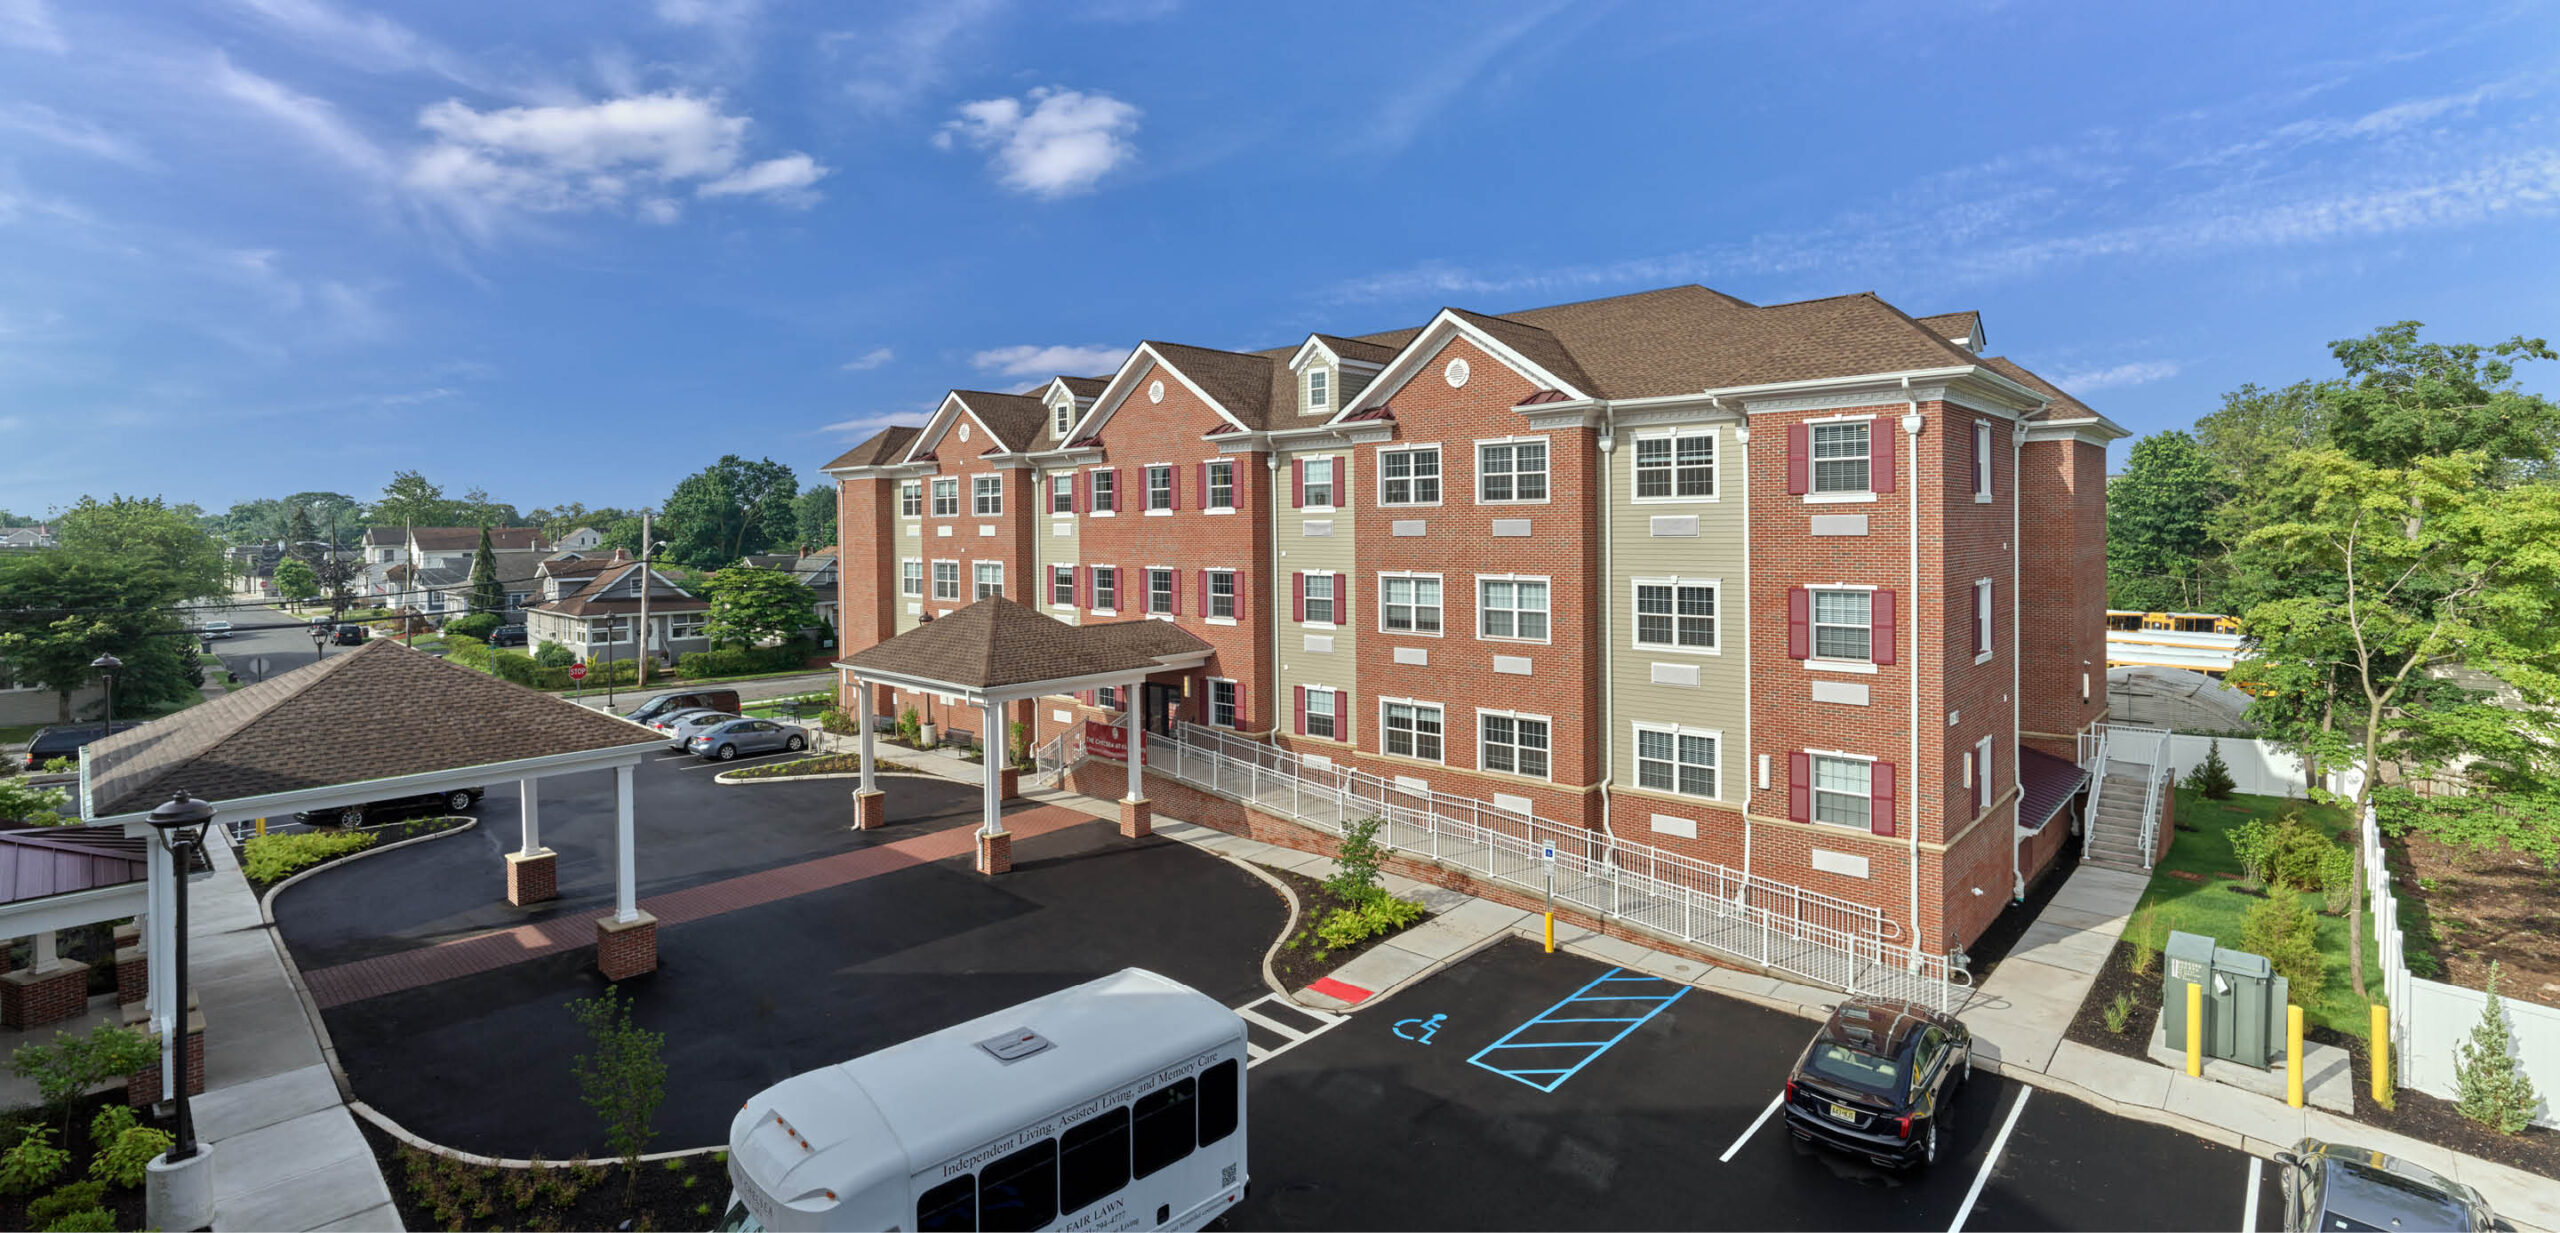 Side view of senior living facility with brick and siding